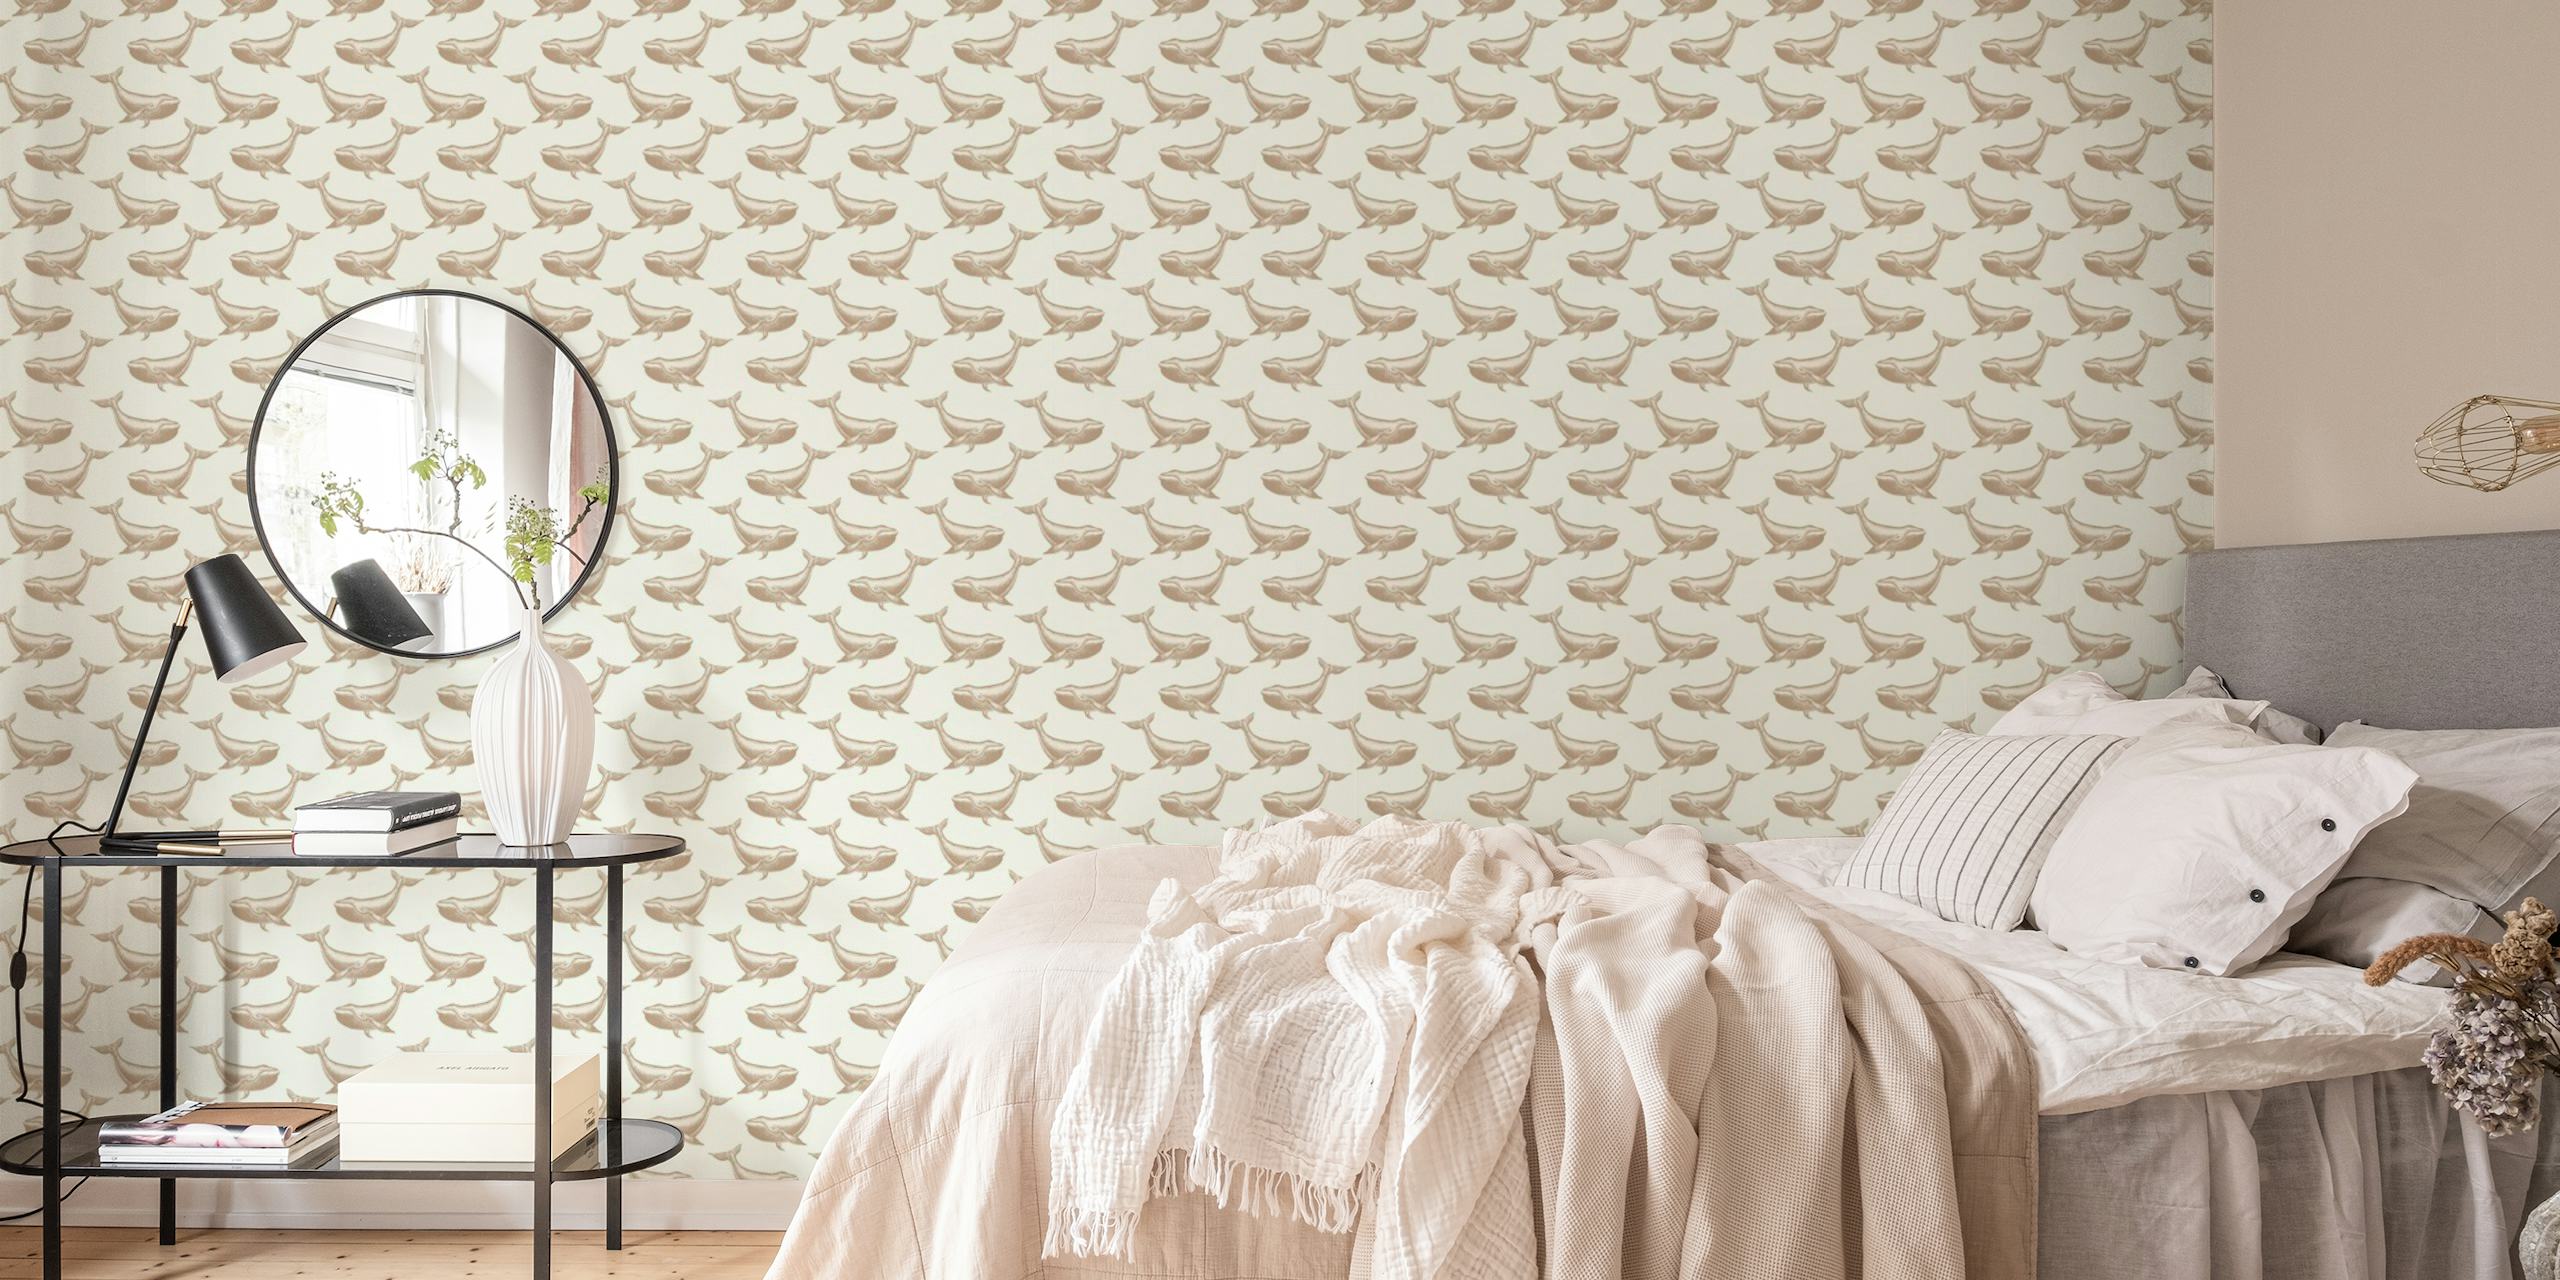 Stylized whale silhouette pattern on a beige background wall mural